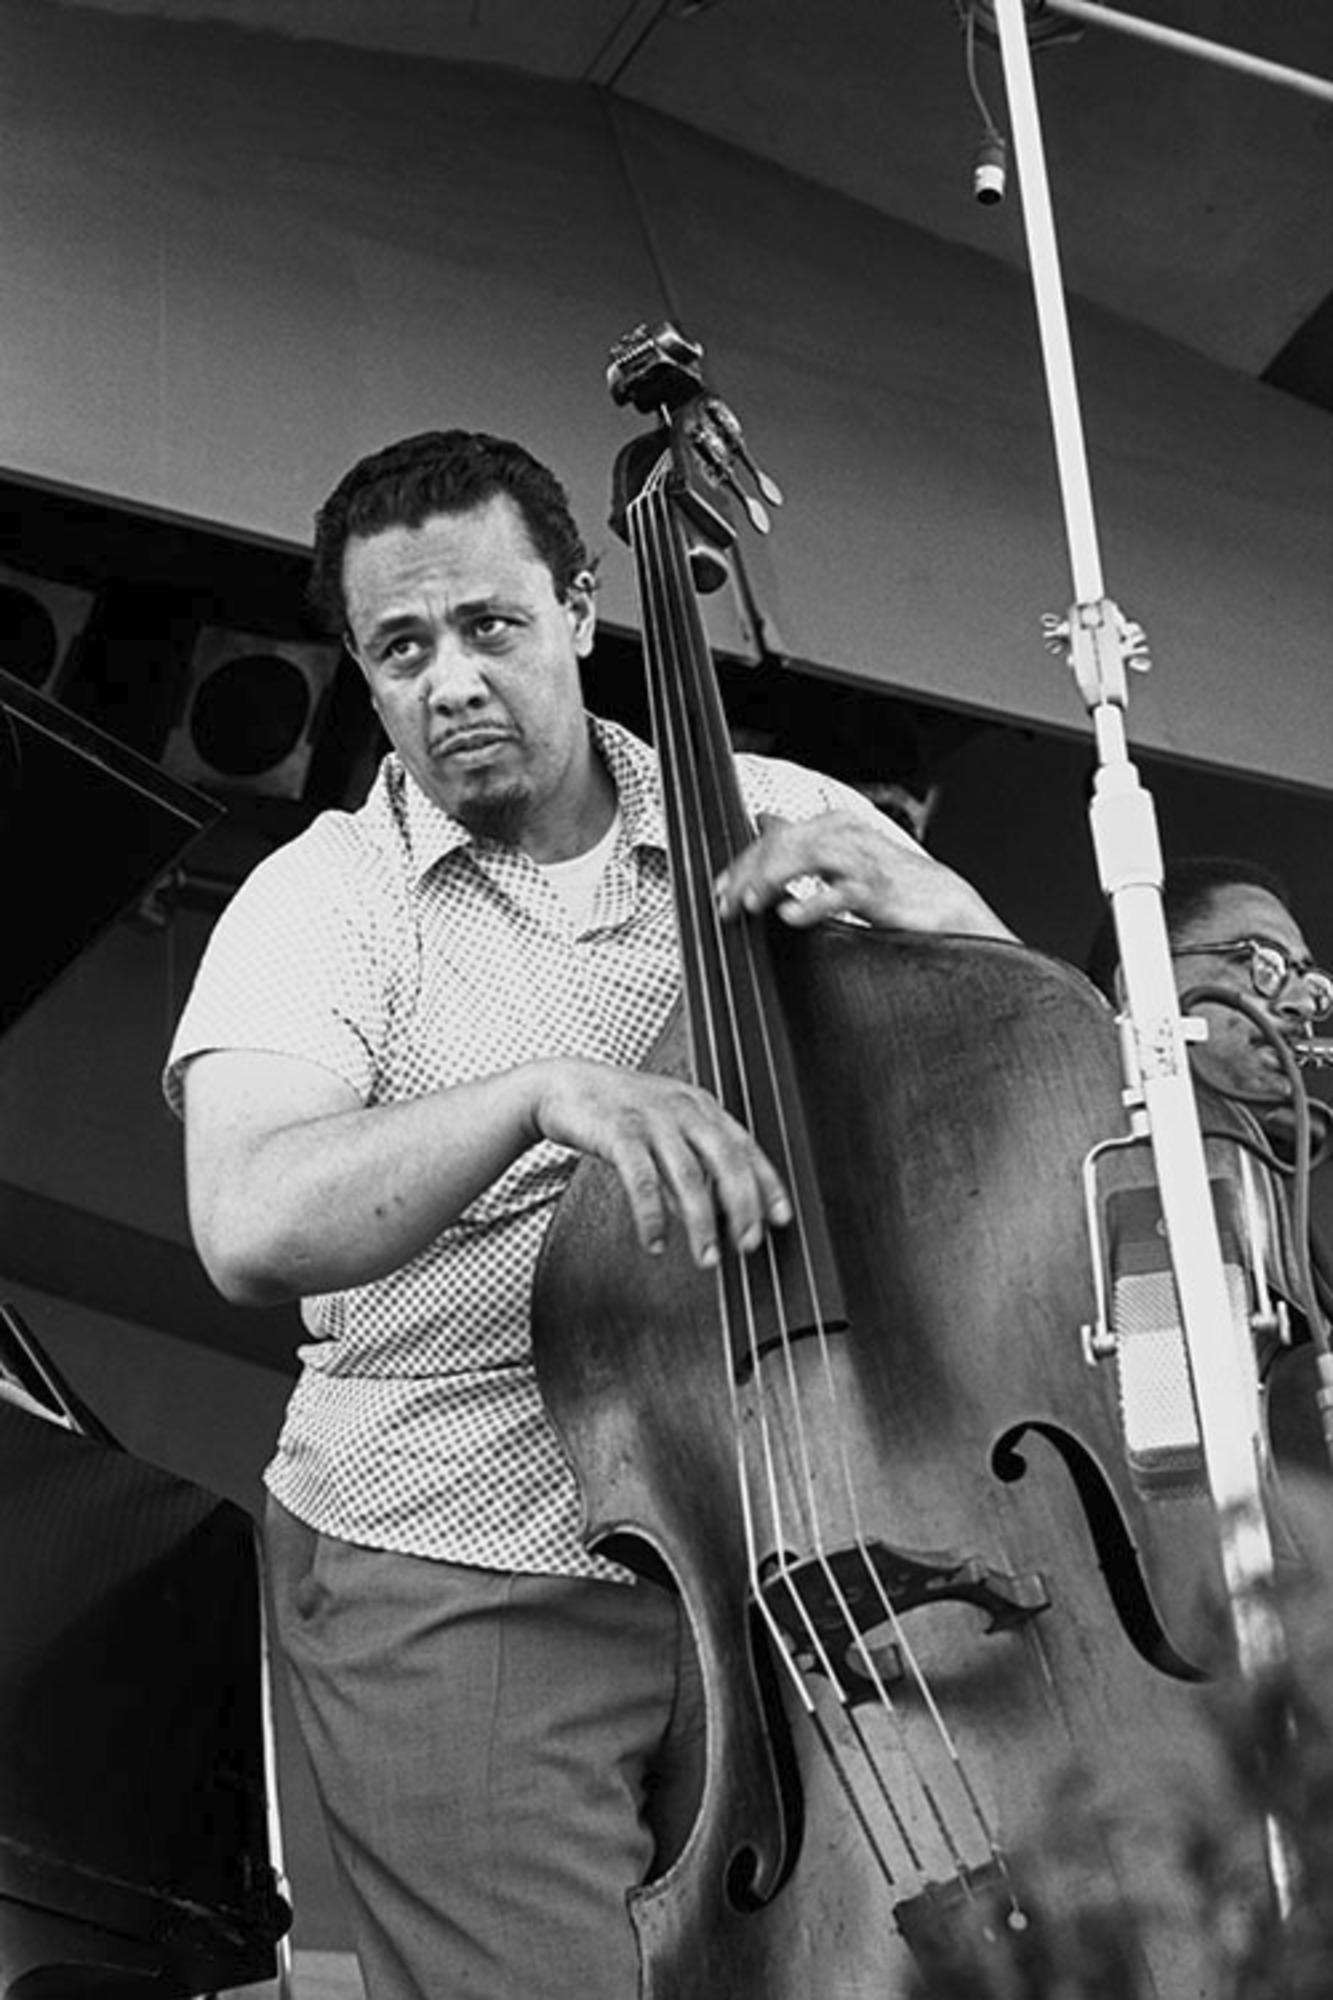 Estate-stamped, gelatin-print silver

Charles Mingus On-stage at the Newport Jazz Festival, Rhode Island, 1959

Available sizes: 
20”x16" Edition of 25
24”x20" Edition of 25
40”x30" Edition of 25
60”x40” Edition of 25

This photograph will be